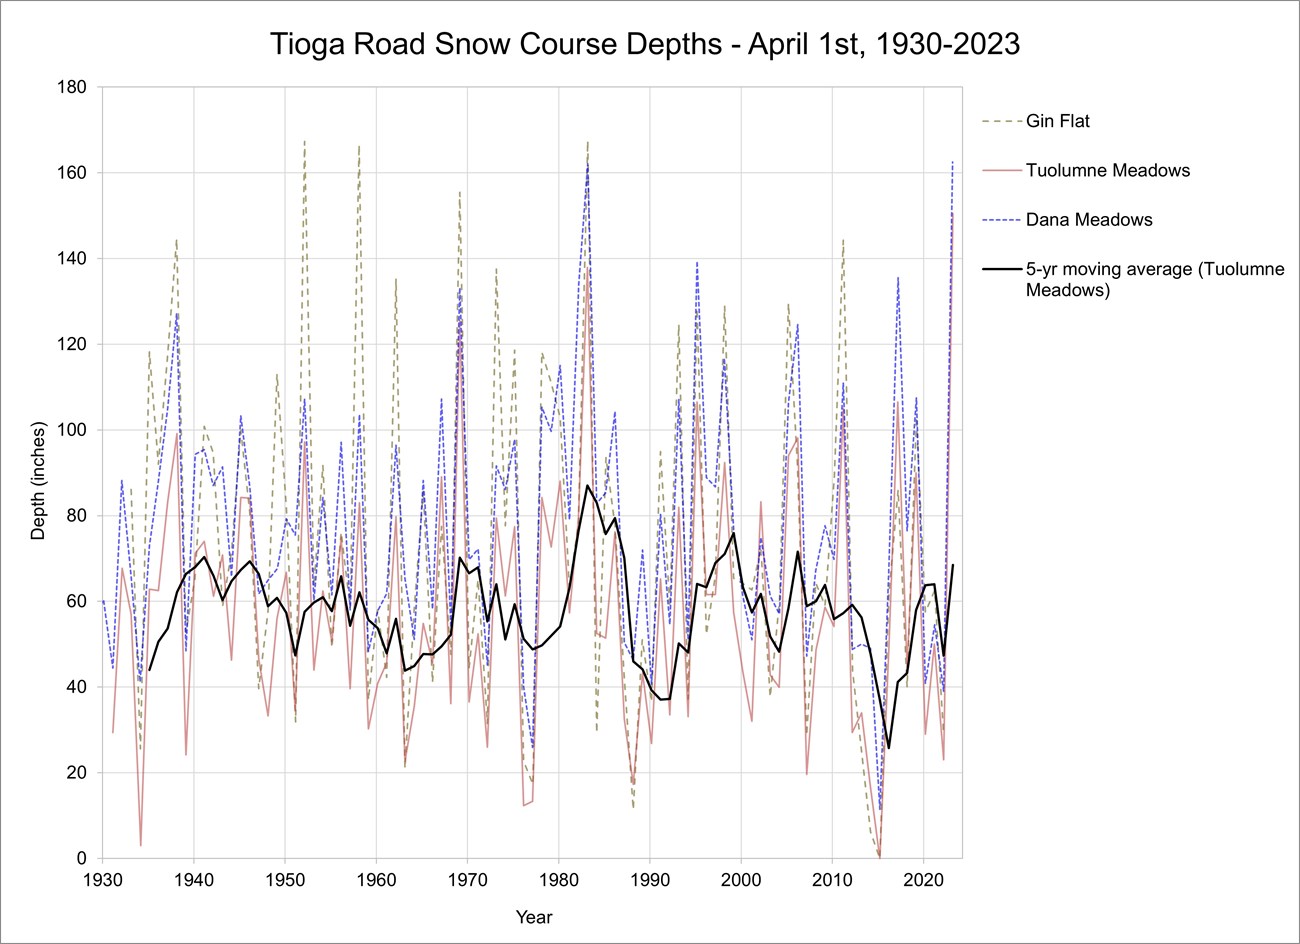 Graph showing fluctations in depth at snow courses along Tioga Road from 1930 to 2023, with numerous peaks and lows. Average is around 60 inches.